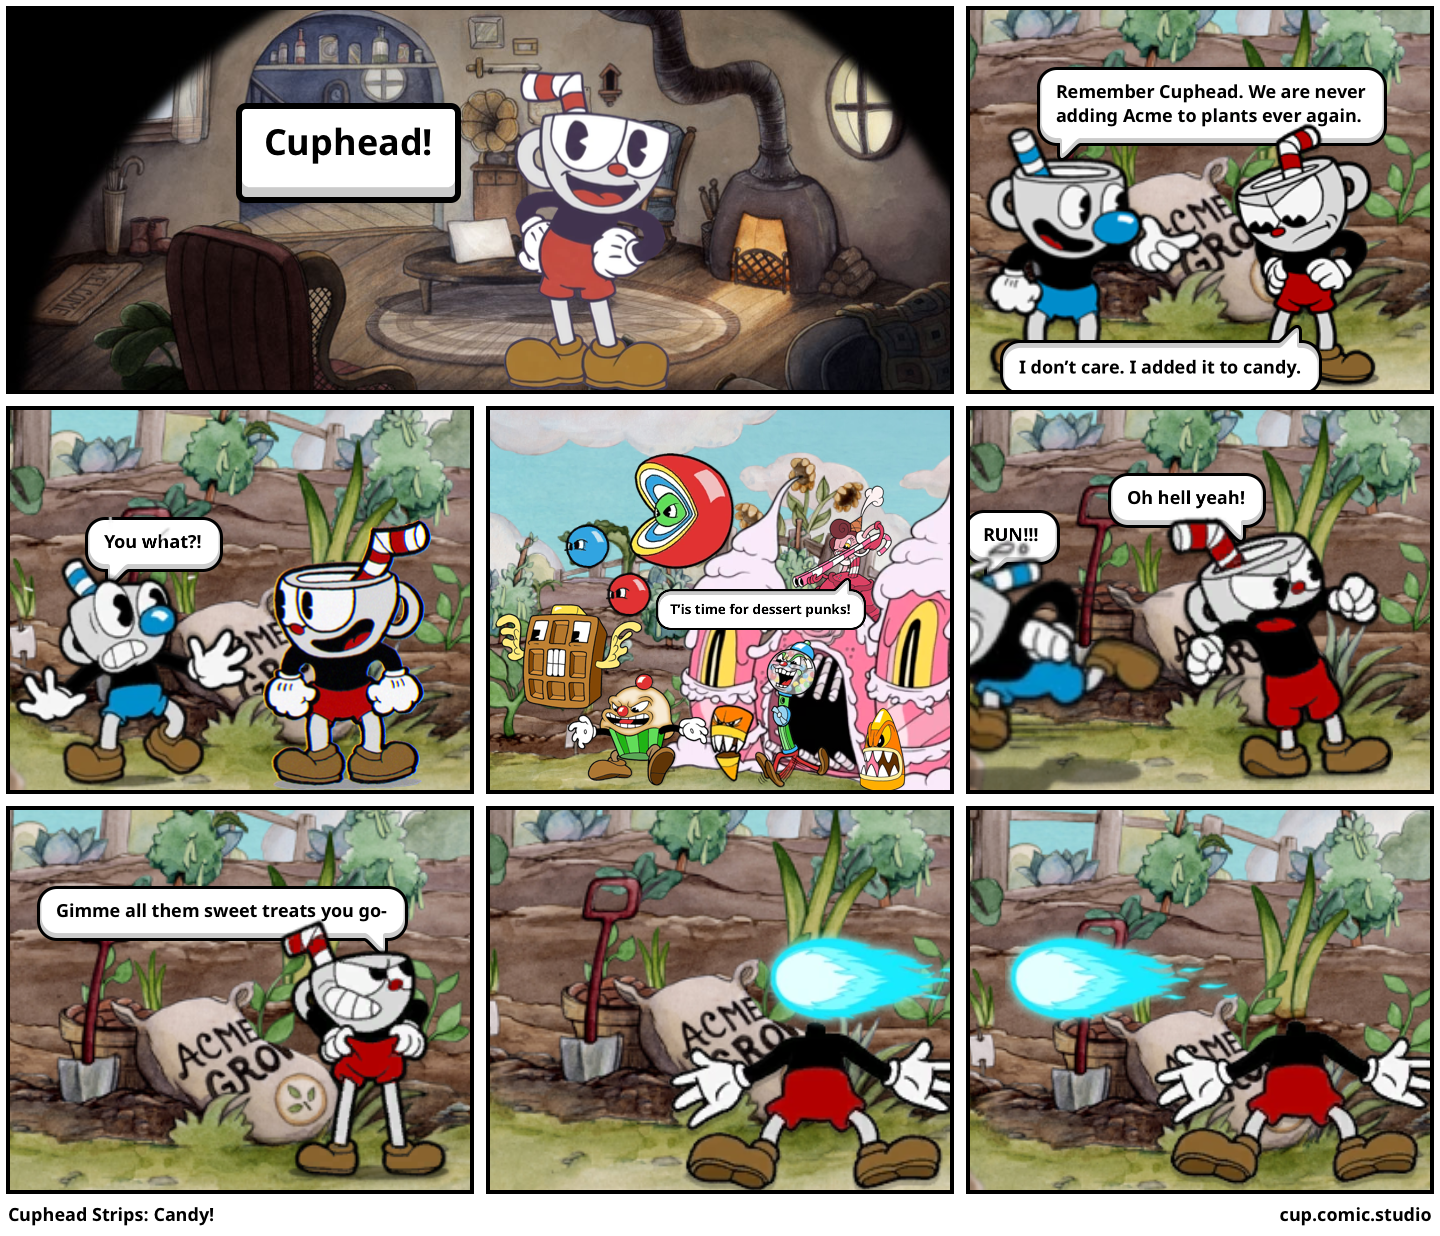 Cuphead Strips: Candy!